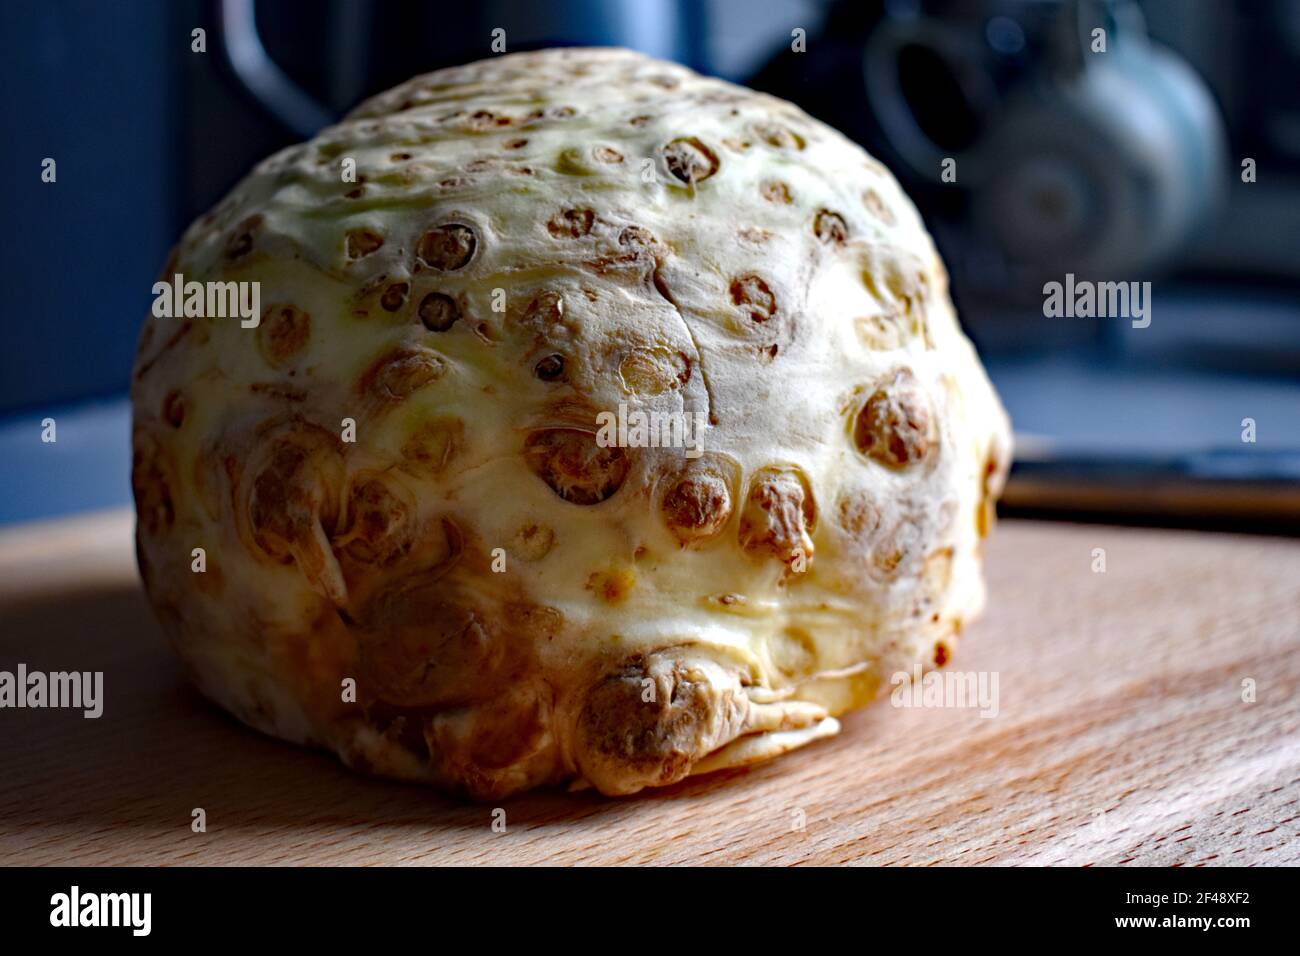 Celeriac, worlds ugliest vegetable, on a wooden chopping board, ceramic cups in the background. Stock Photo